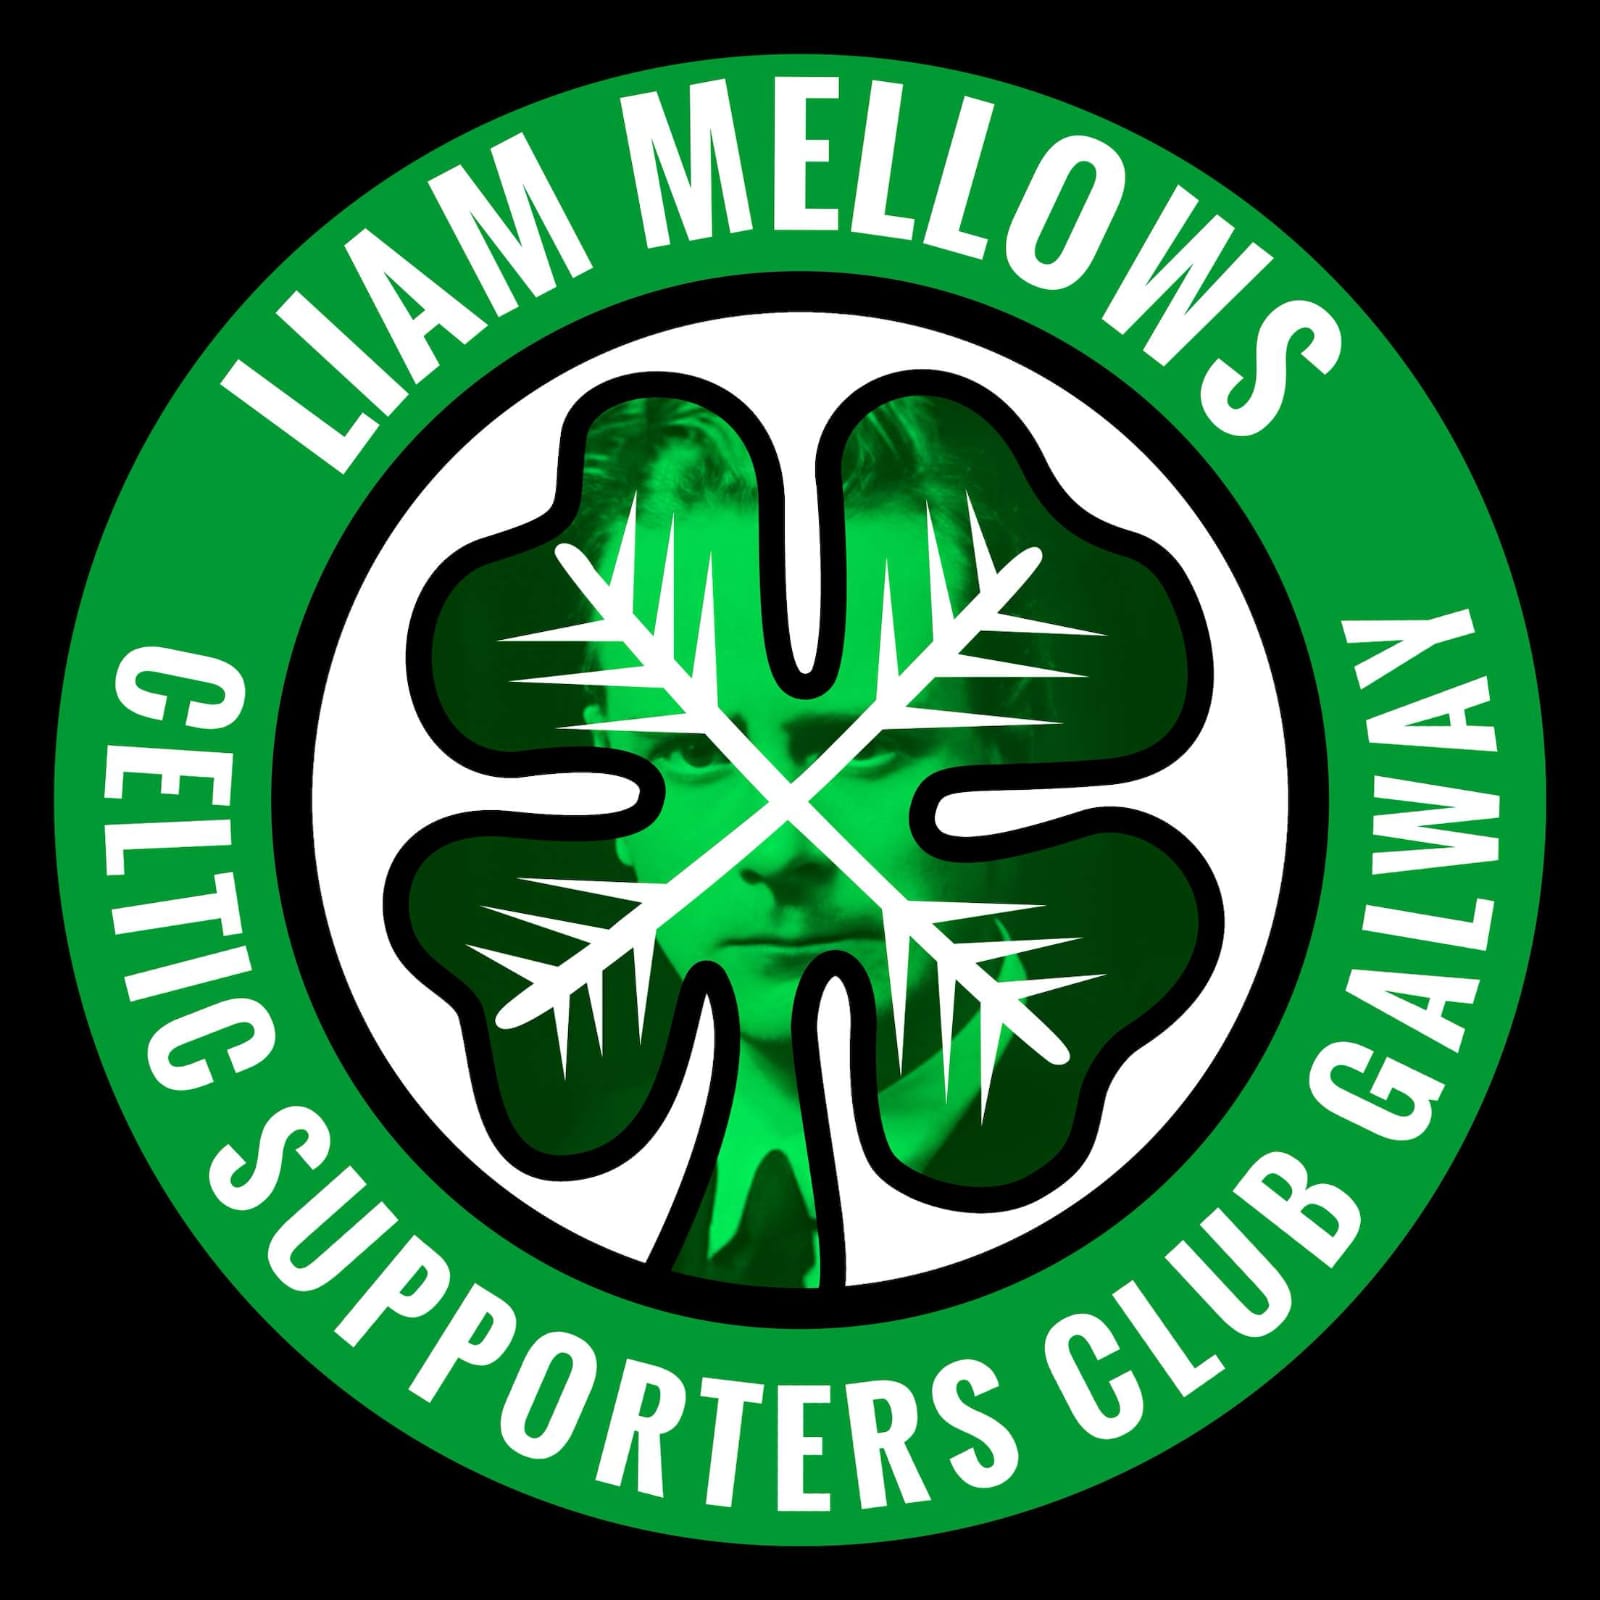  12.Celtic Supporters Club Galway 